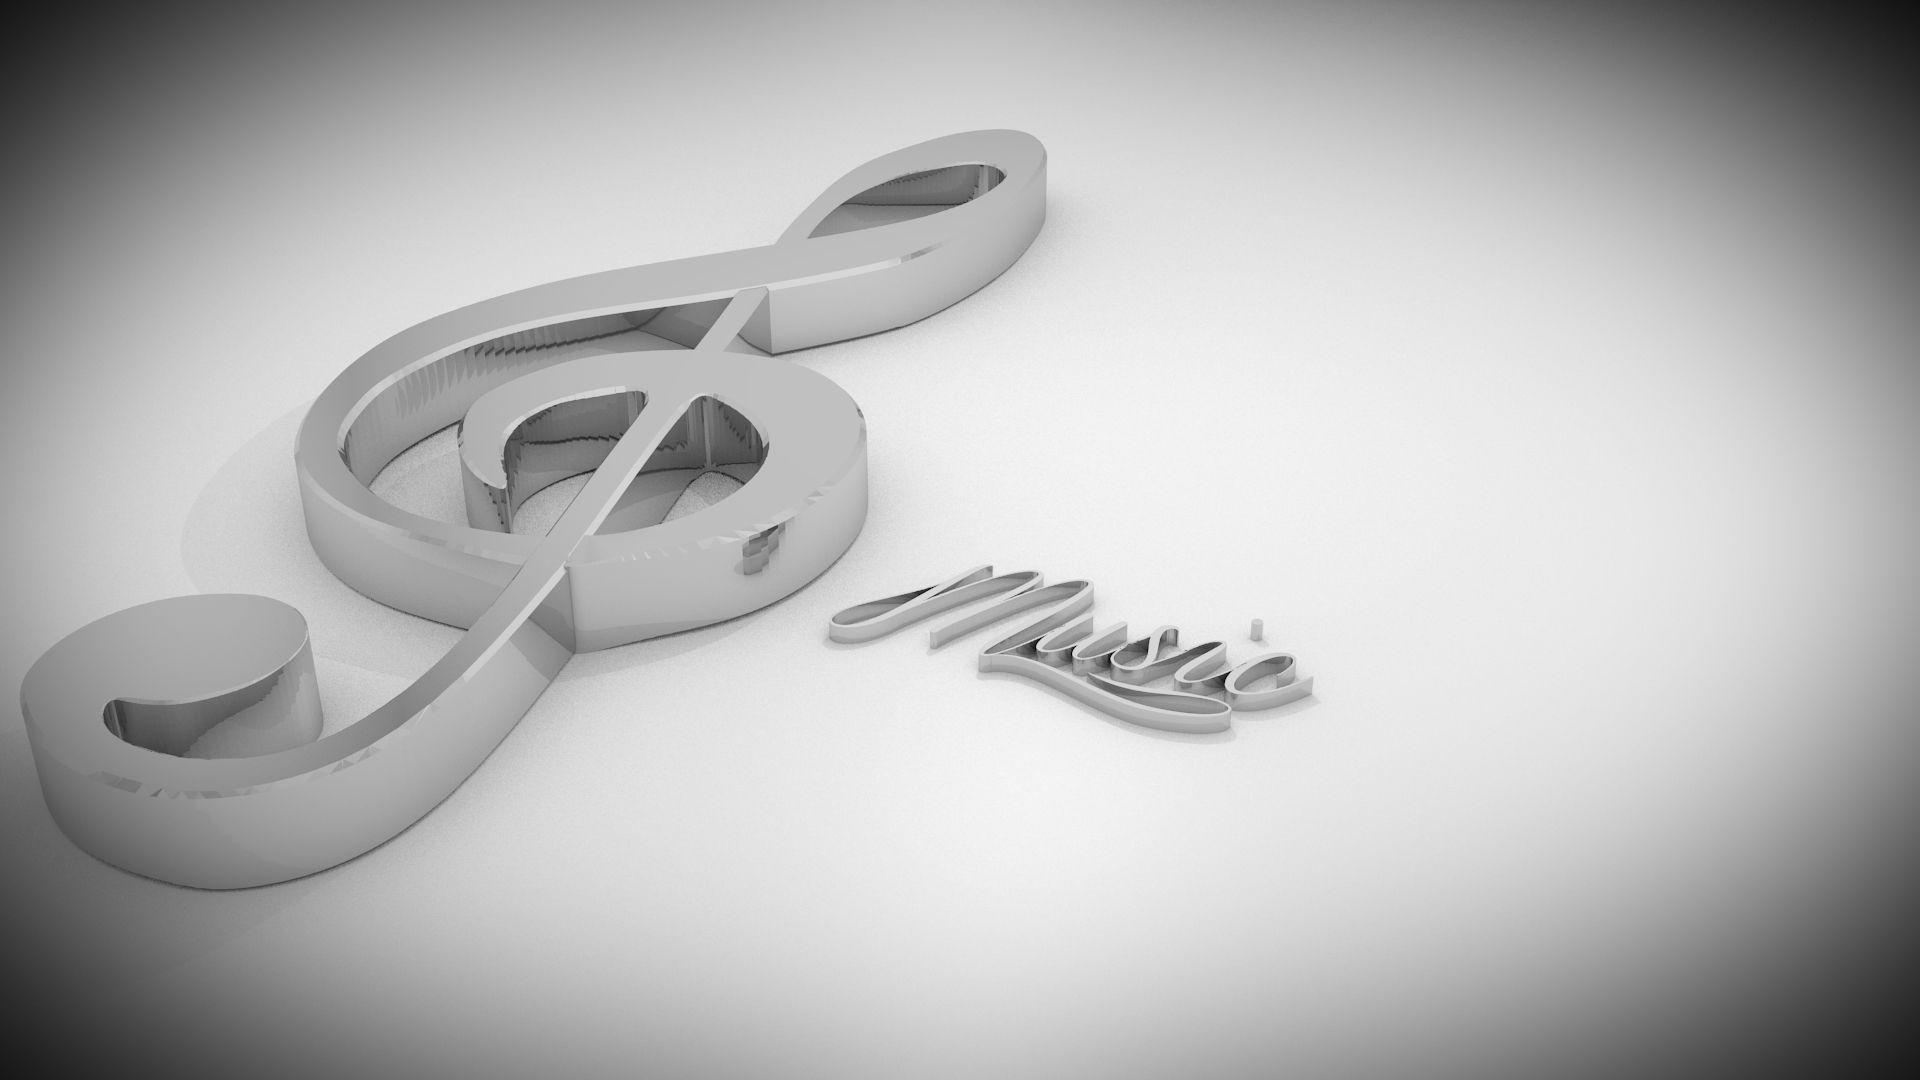 Treble Clef Full HD Wallpaper and Background Imagex1080